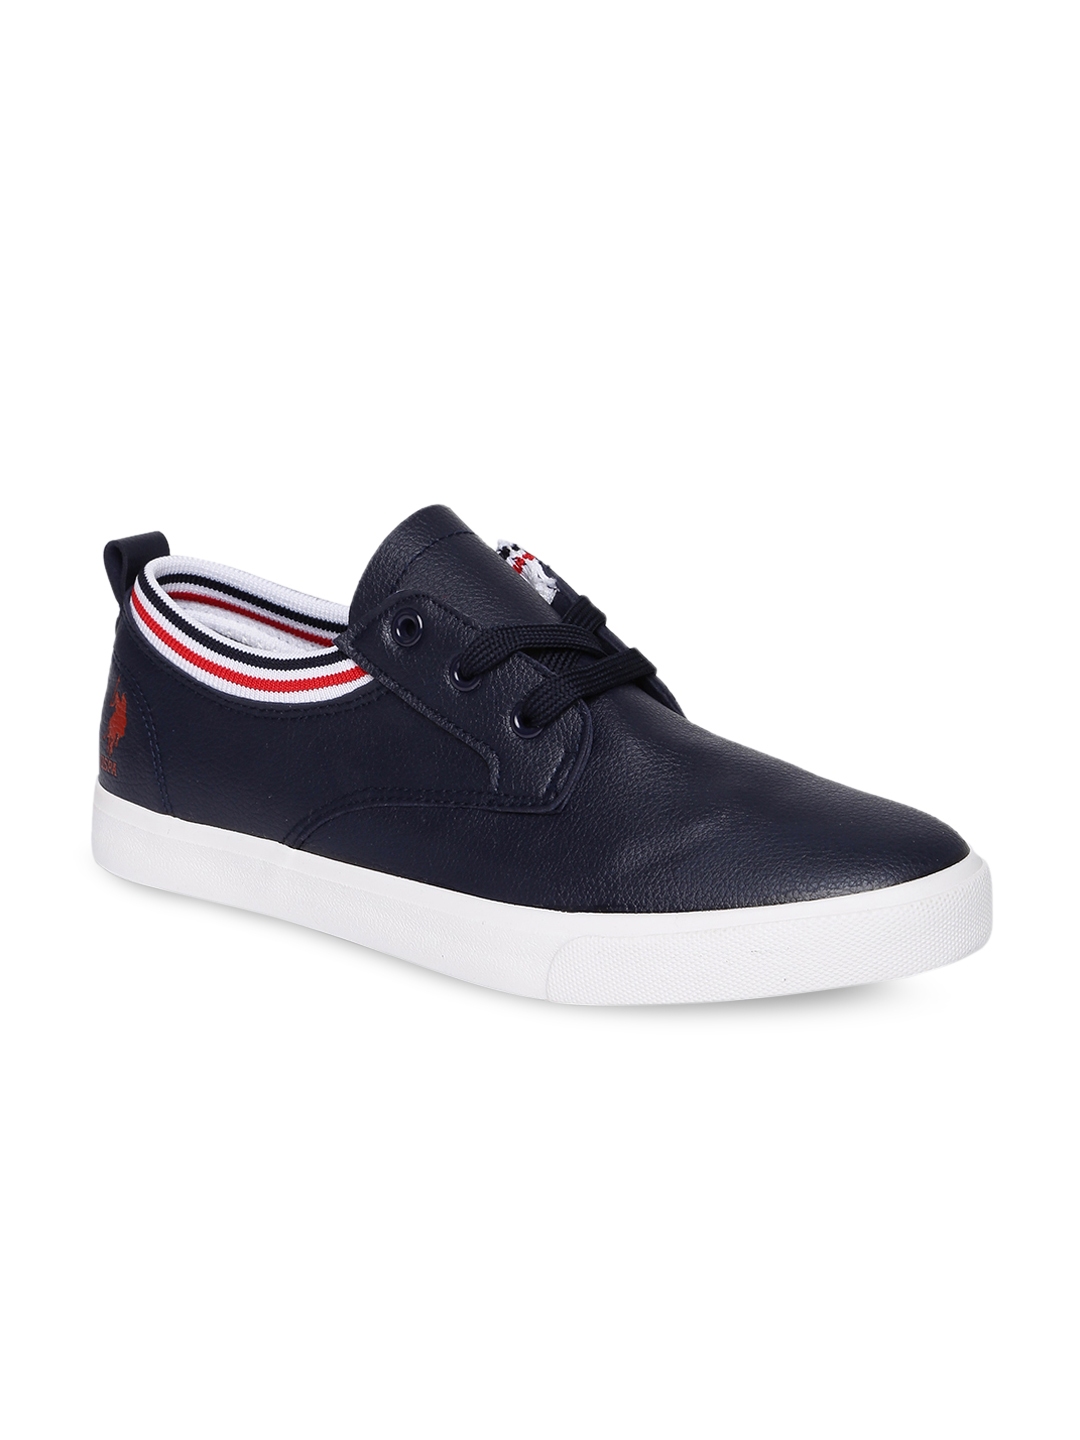 Buy U.S. Polo Assn. Men Navy Blue Kaiden Sneakers - Casual Shoes for ...